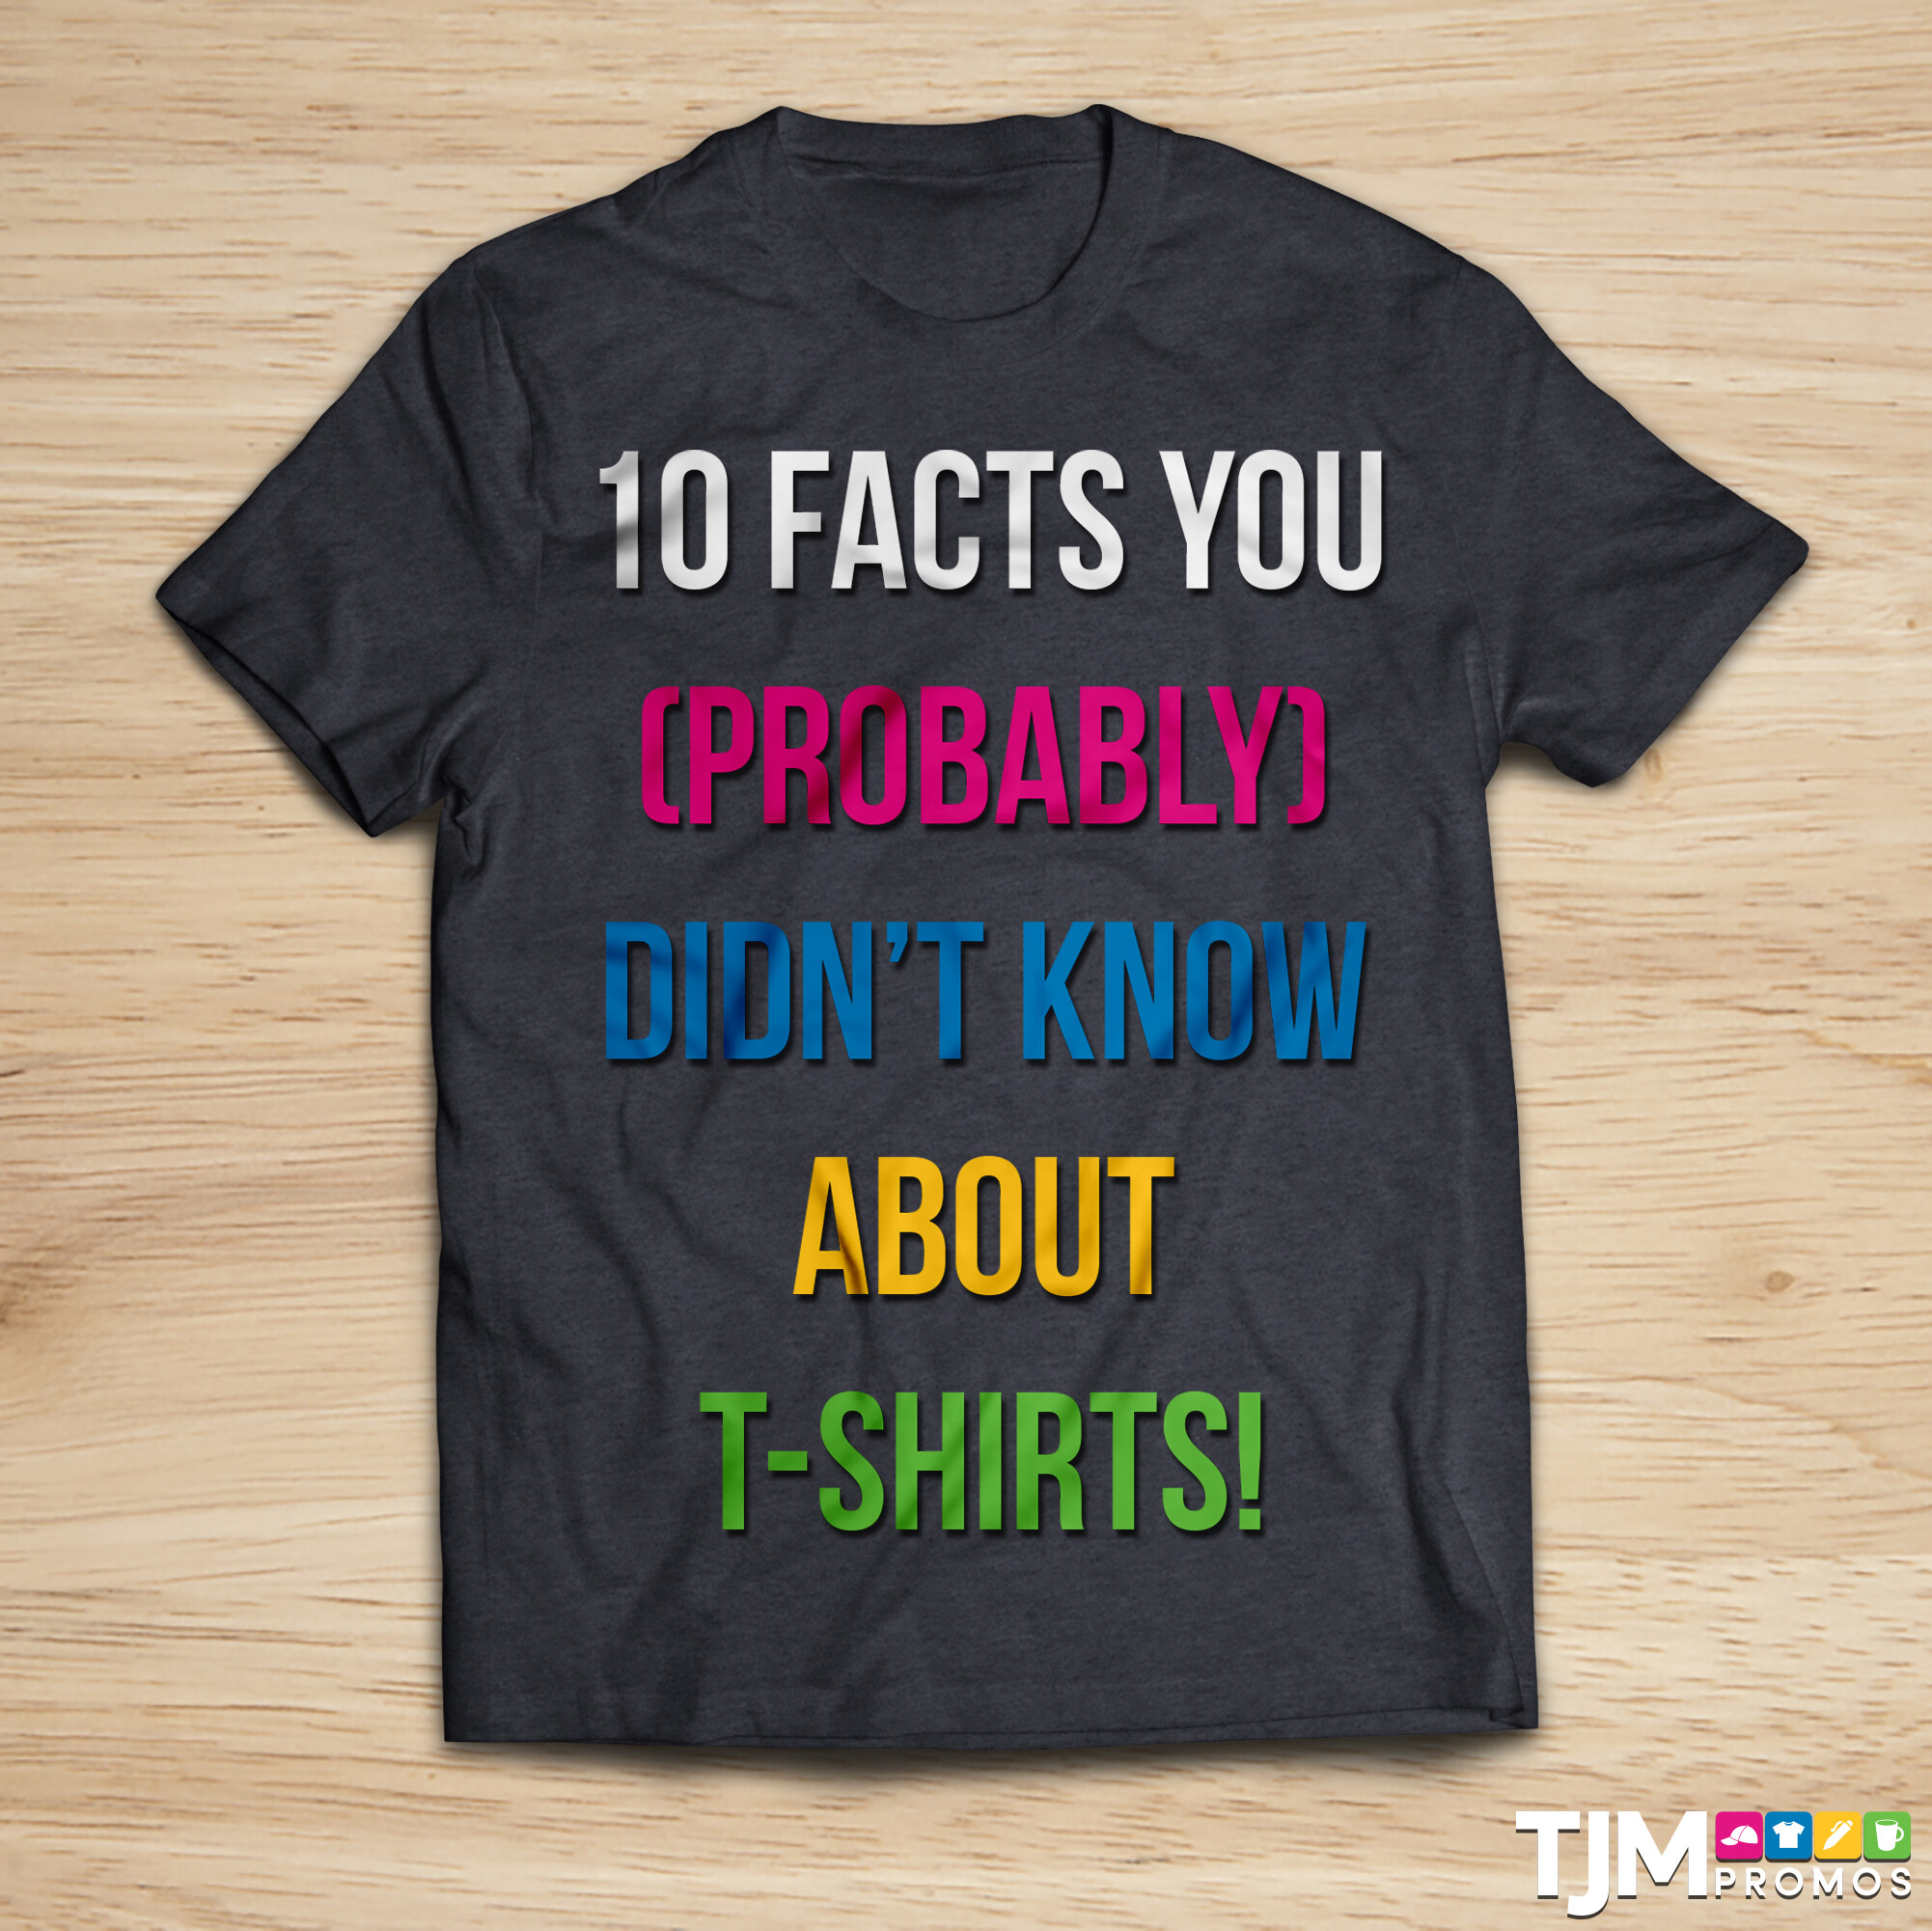 10 Facts You (Probably) Didn't Know About T-Shirts!